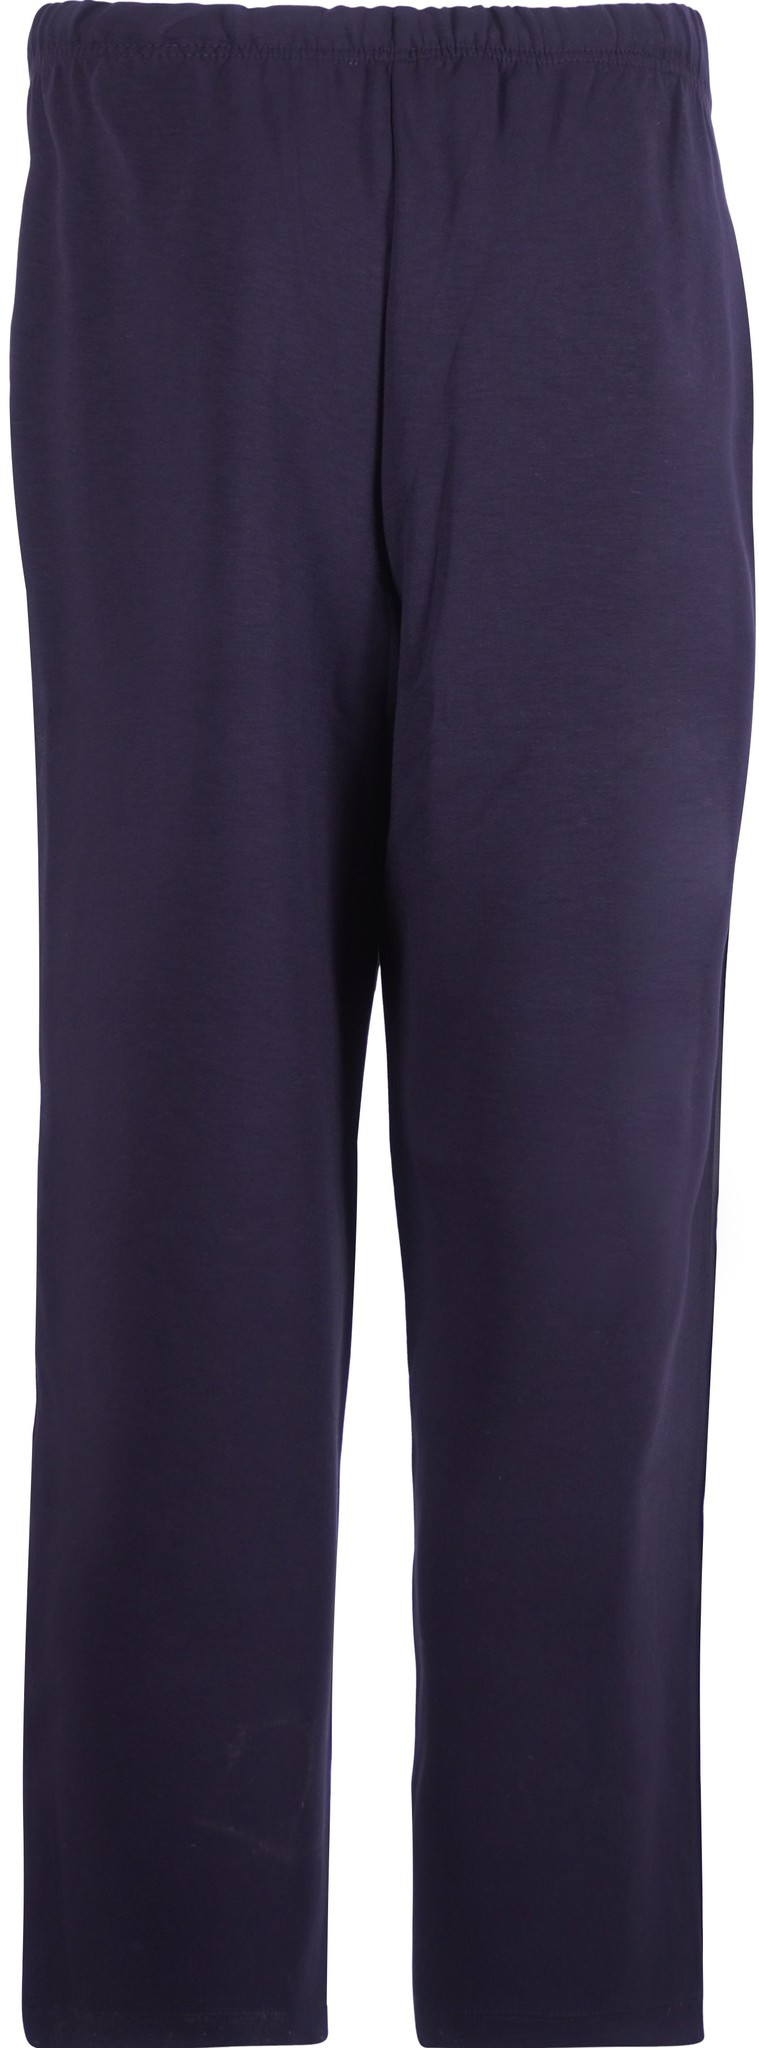 Tommy Hilfiger Sweat-pants Donkerblauw Dames maat S